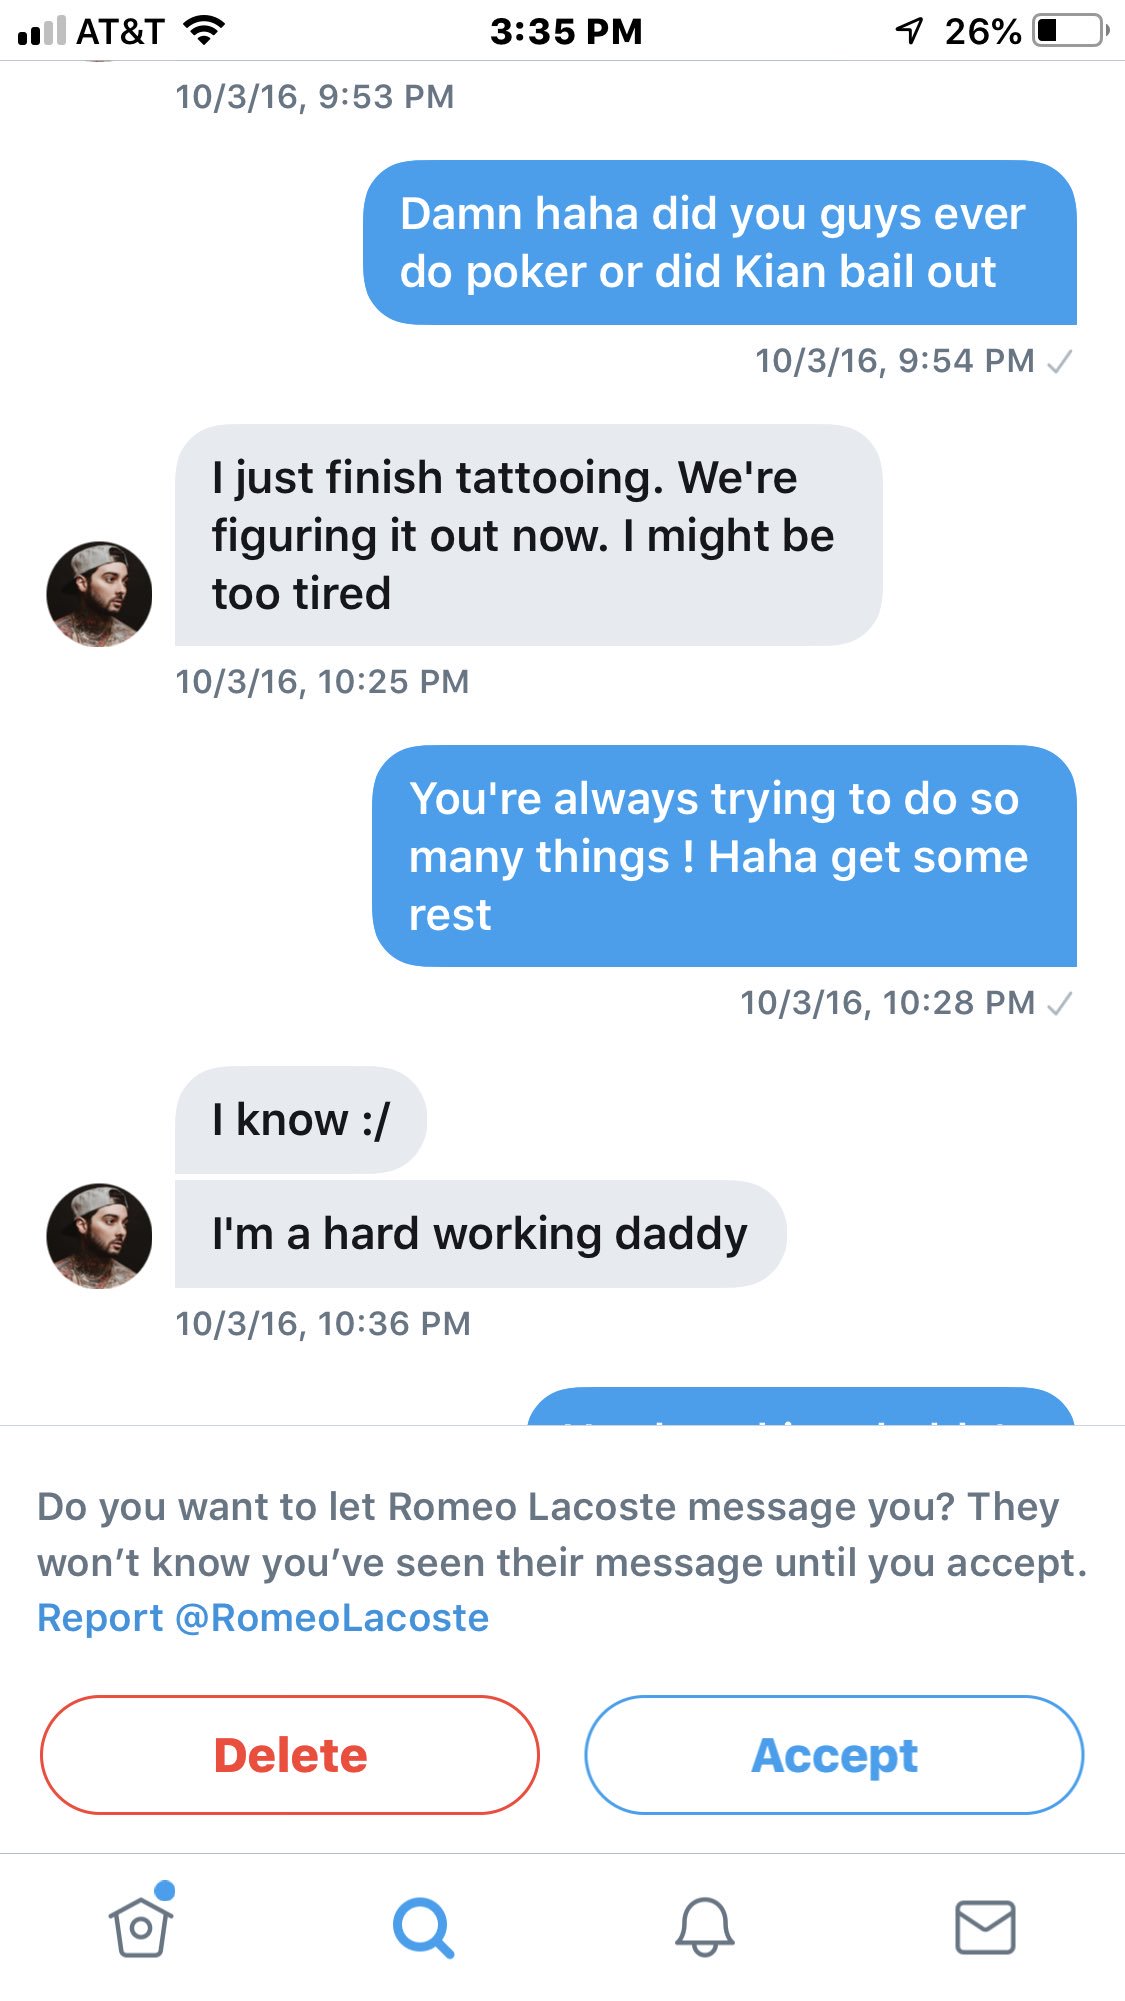 lov skære ned Arkitektur elijah daniel on Twitter: "ROMEO LACOSTE RLY ASKED AN UNDERAGE GIRL TO LICK  HIS ASSHOLE AND CHASE SHOTS OF VODKA W HIS CUM ANYWAY THERE ARE ACTUALLY  TALENTED TATTOO ARTISTS IN LA